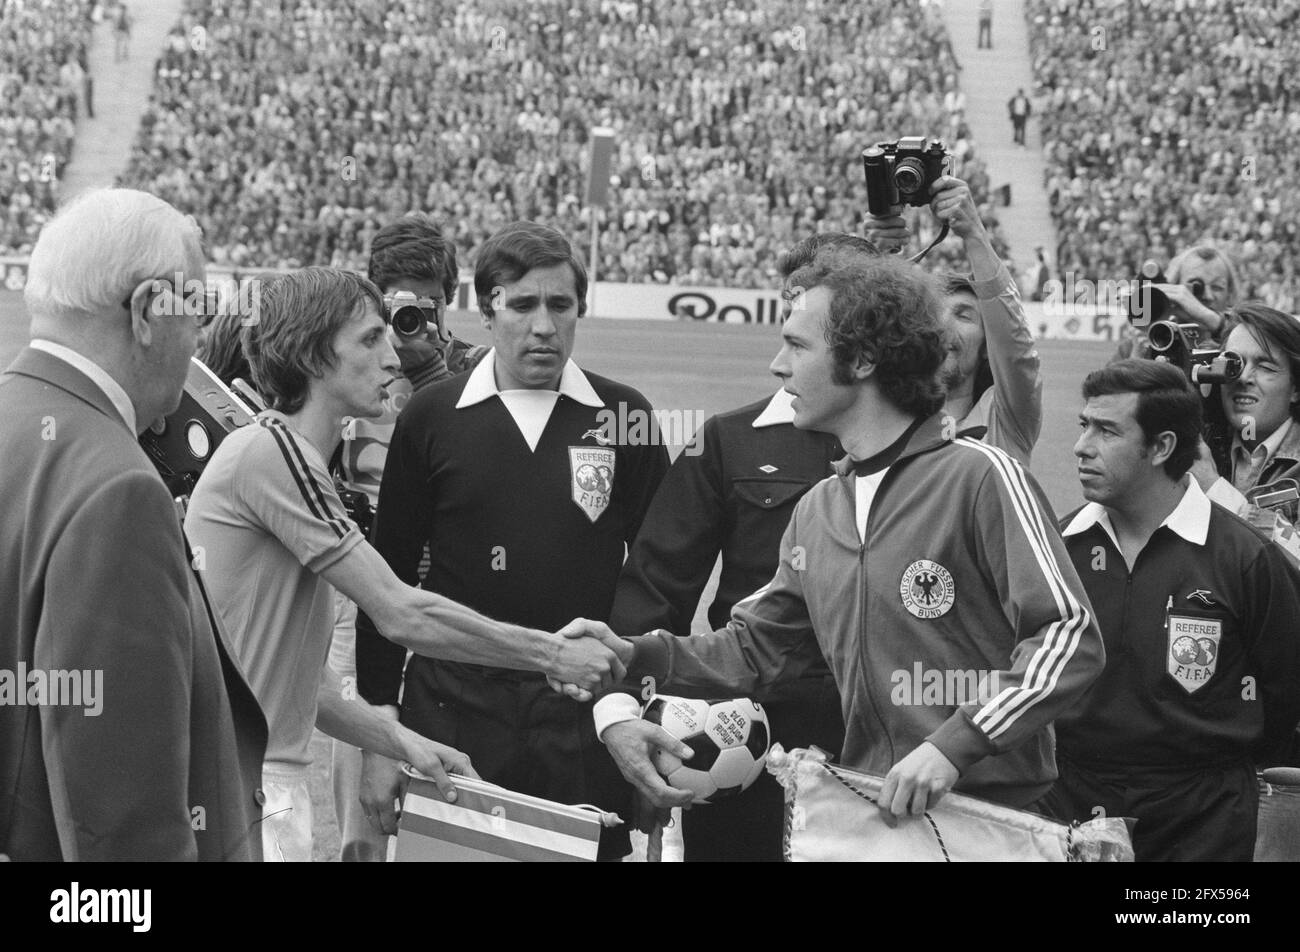 World Cup final 1974 in Munich, West Germany v. Netherlands 2-1; Cruijff (left) and Beckenbauer give pennants, July 7, 1974, finals, sports, soccer, world championships, The Netherlands, 20th century press agency photo, news to remember, documentary, historic photography 1945-1990, visual stories, human history of the Twentieth Century, capturing moments in time Stock Photo